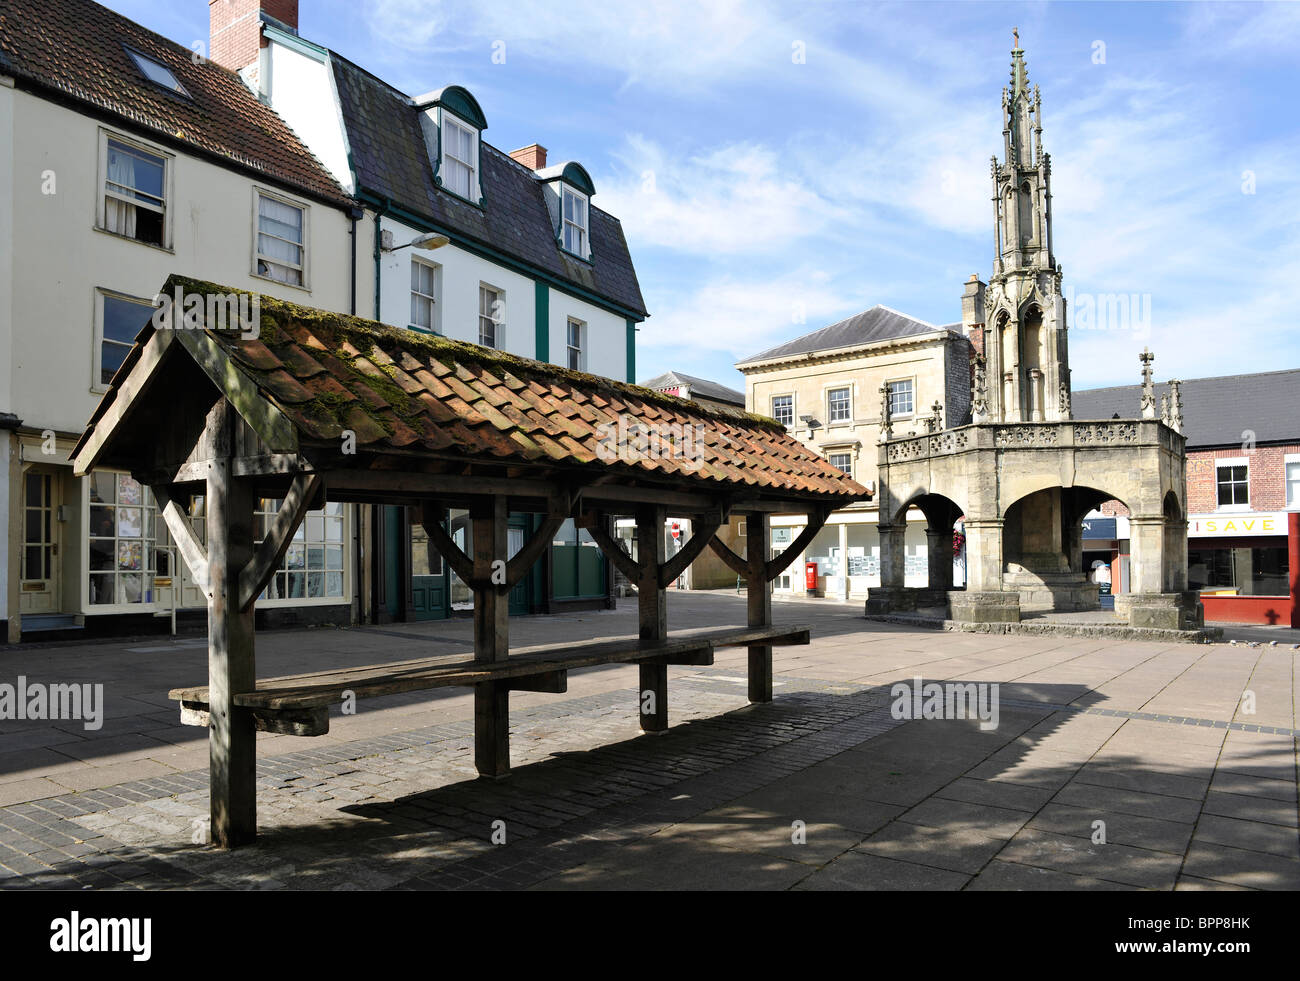 Shepton Mallet town centre looking from the Shambles, looking towards the Market Cross. Stock Photo